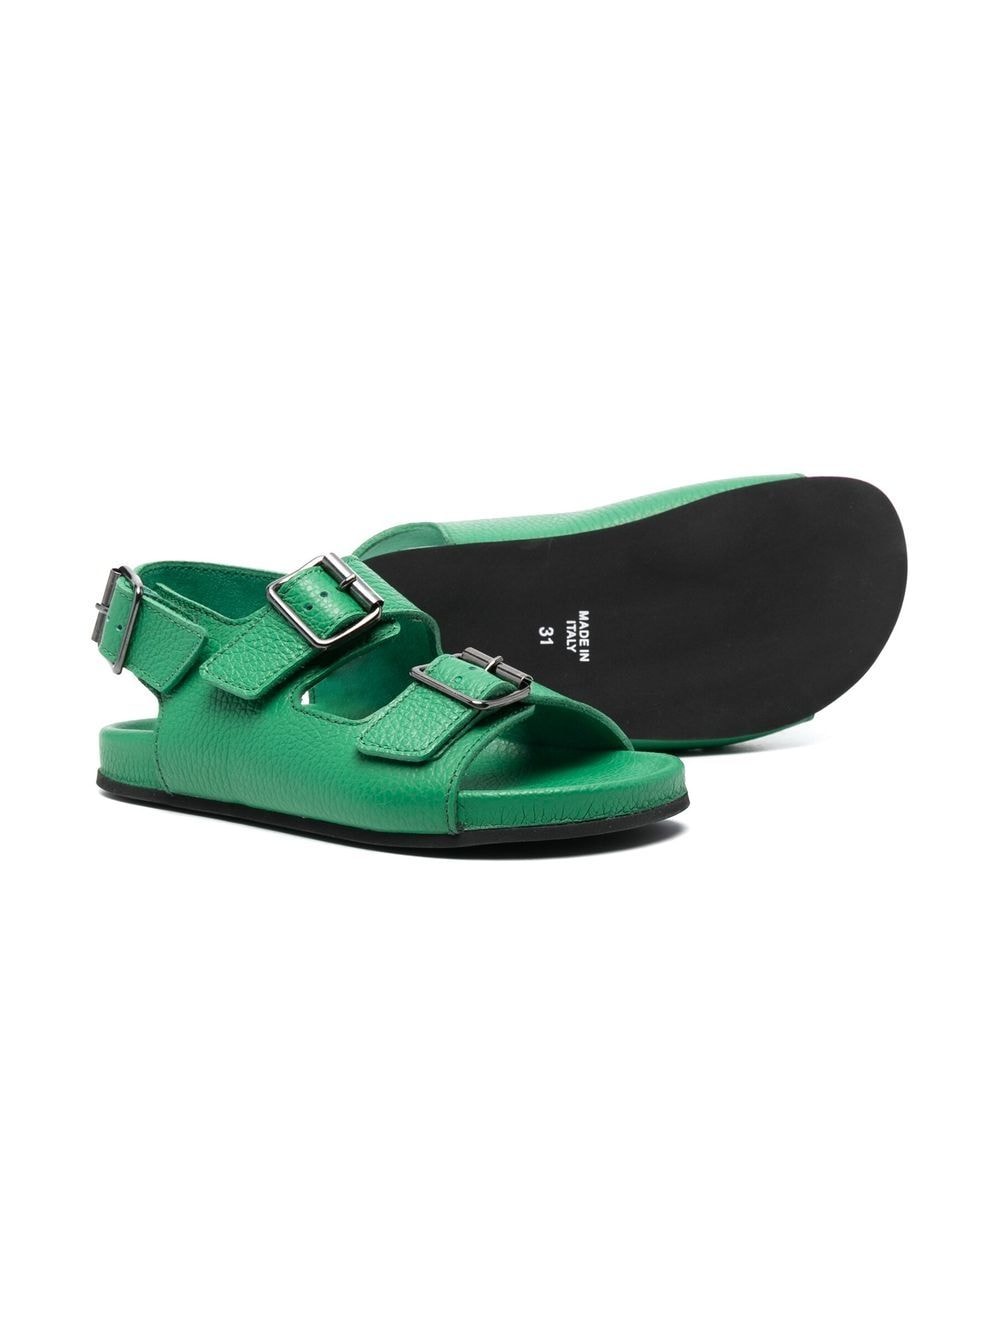 Shop Gallucci Buckled Leather Sandals In Green